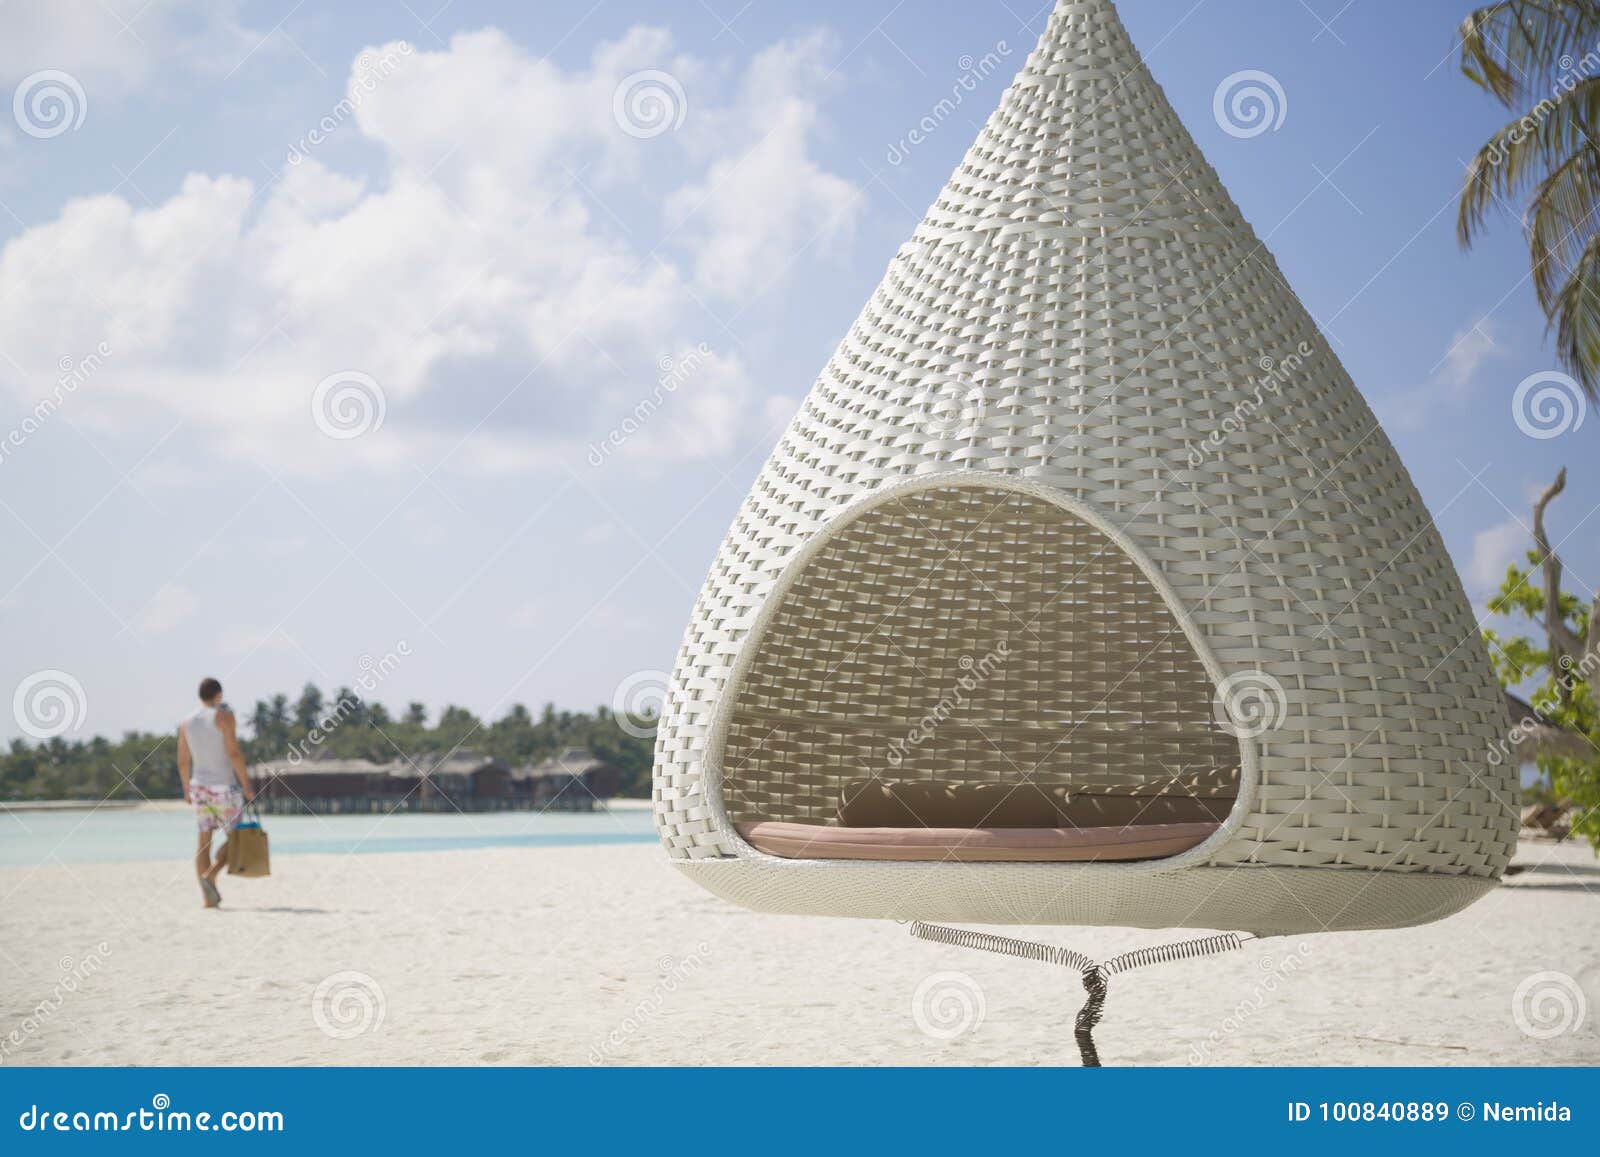 Cocoon Hammock in the Beach in the Maldives Stock Image - Image of ...